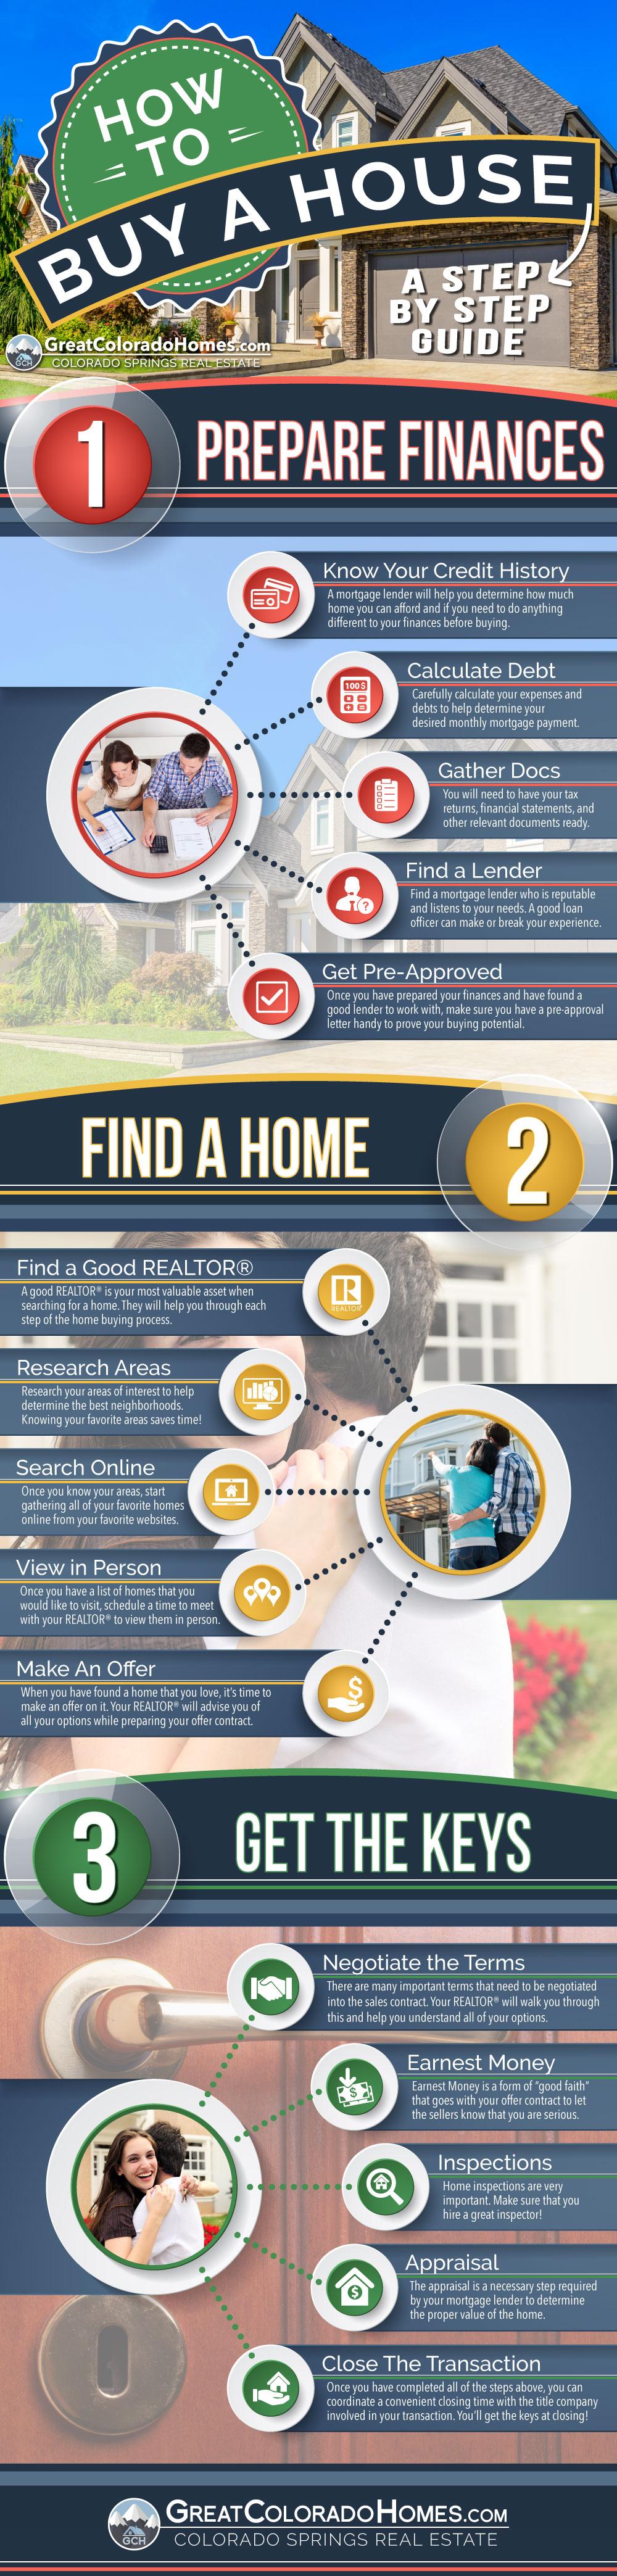 How To Buy A House Step By Step Guide Infographic